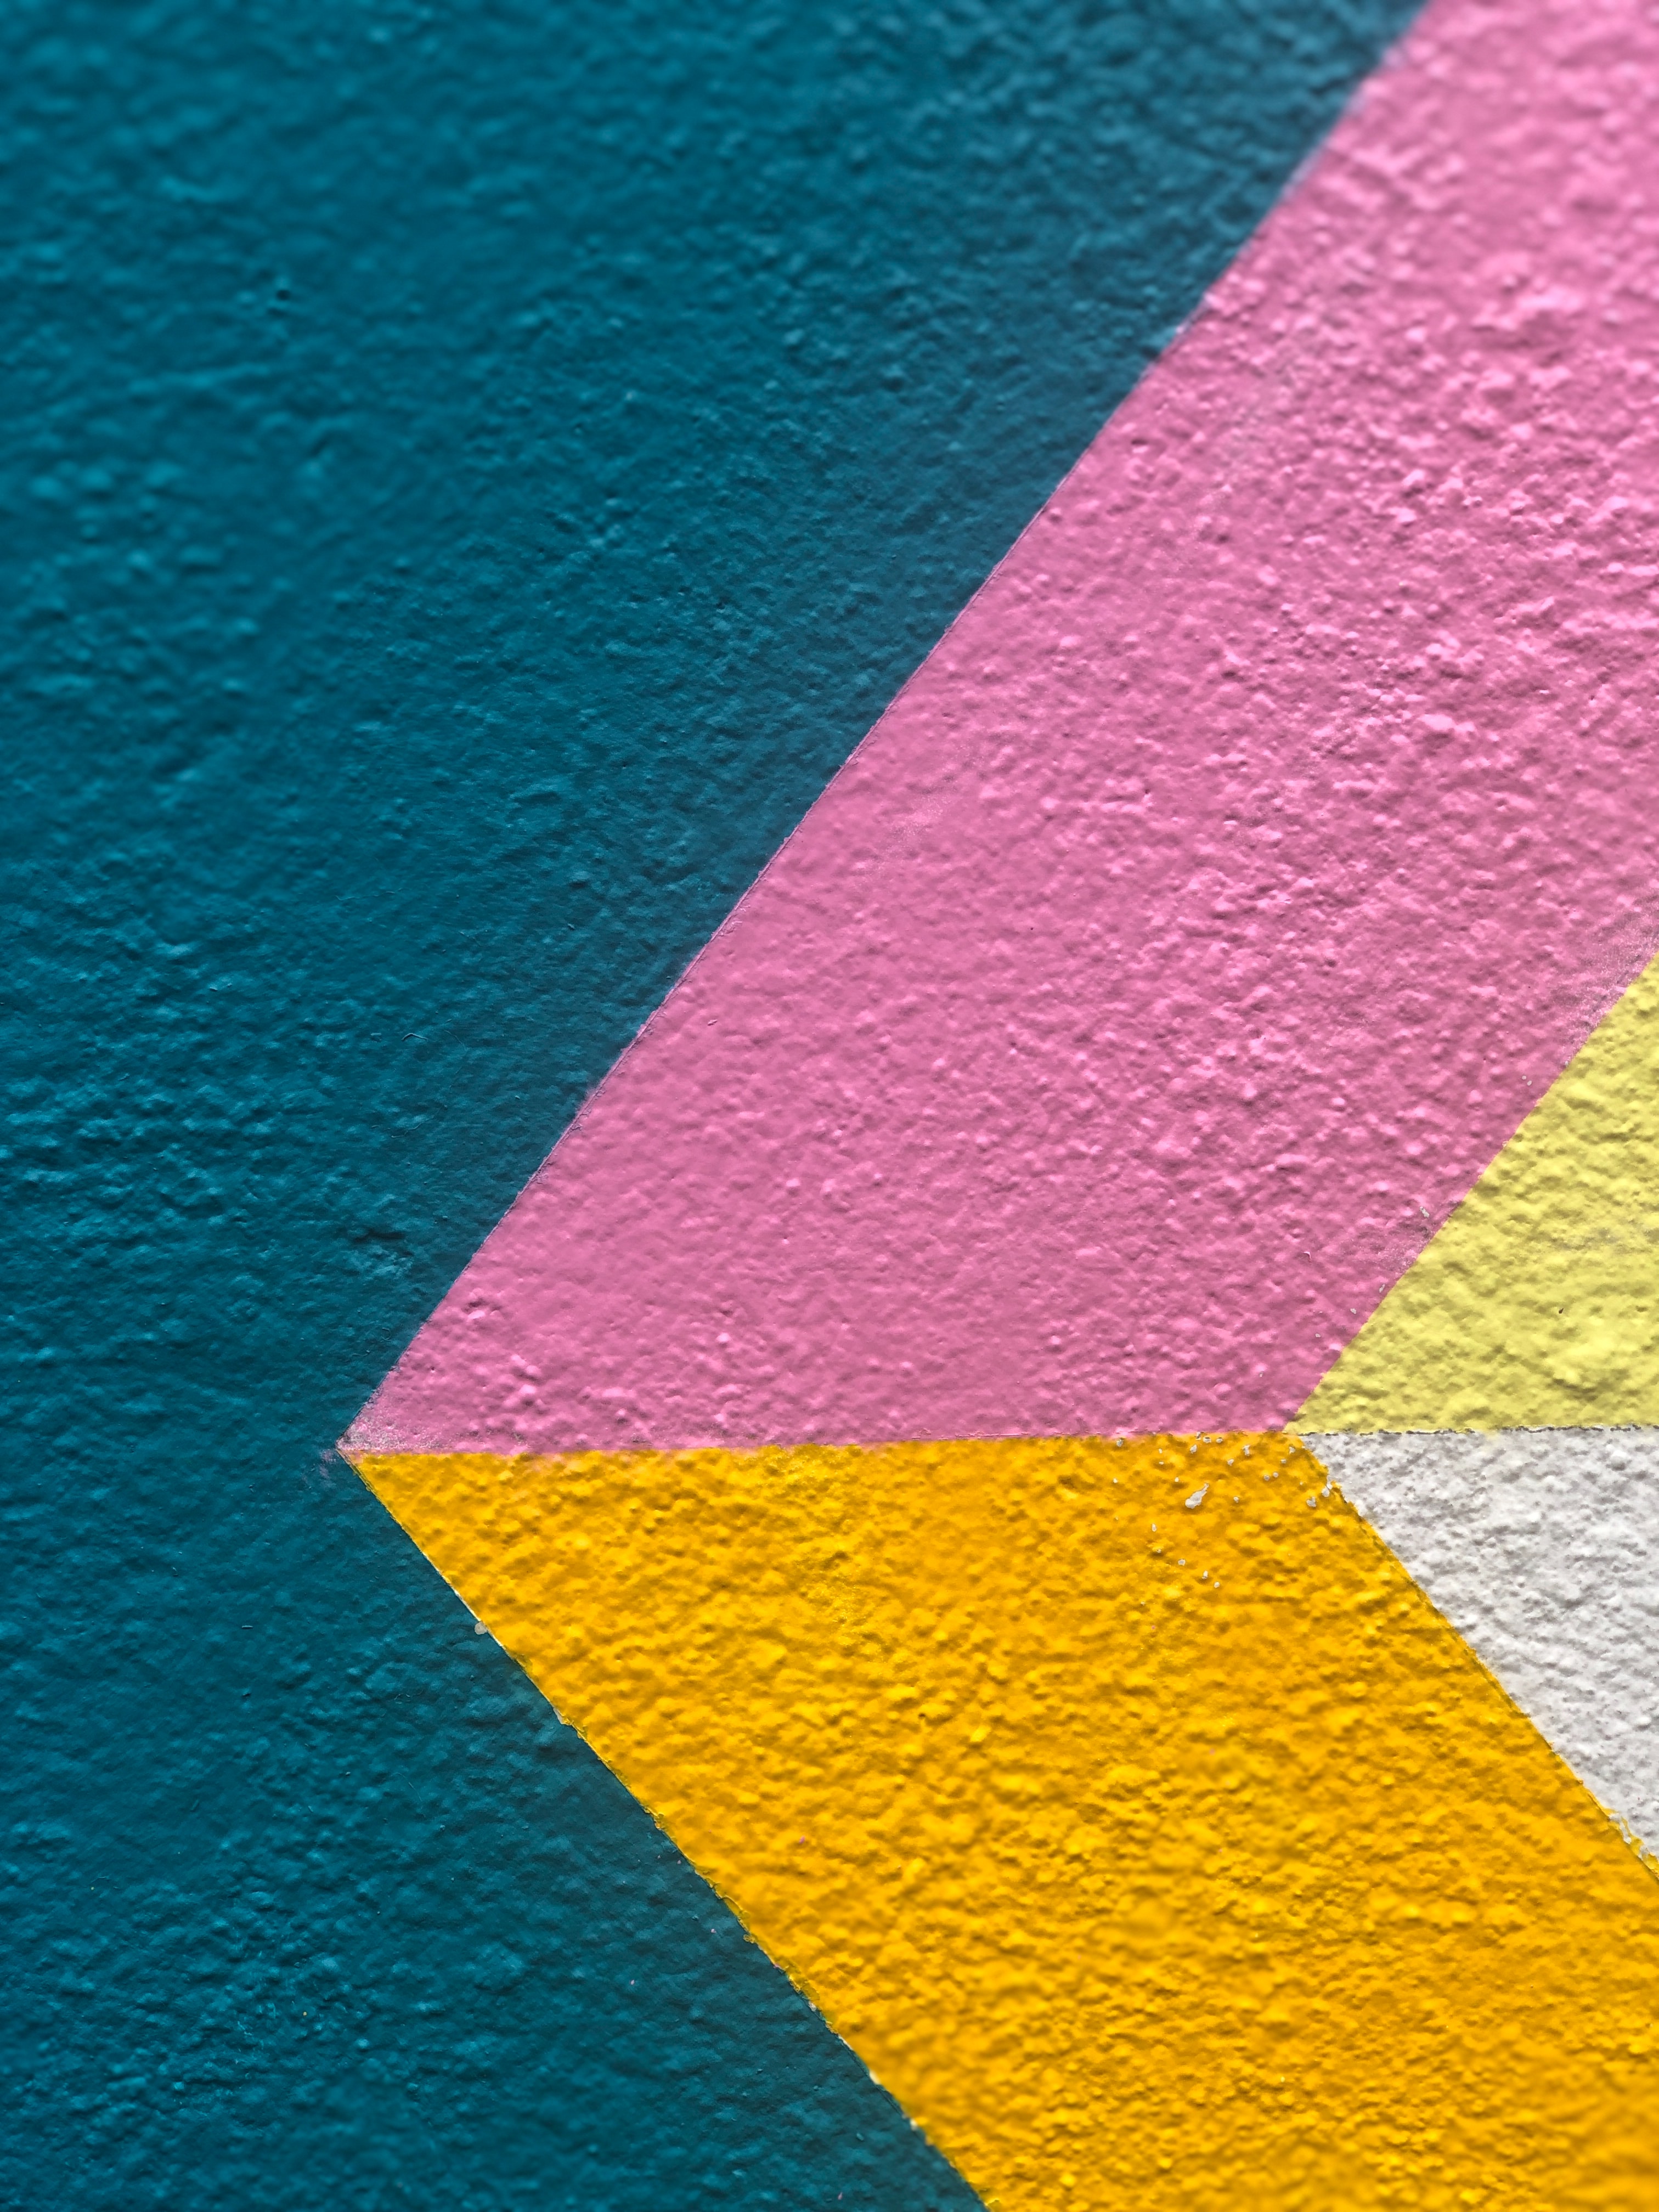 multicolored, motley, pattern, texture, textures, paint, wall UHD